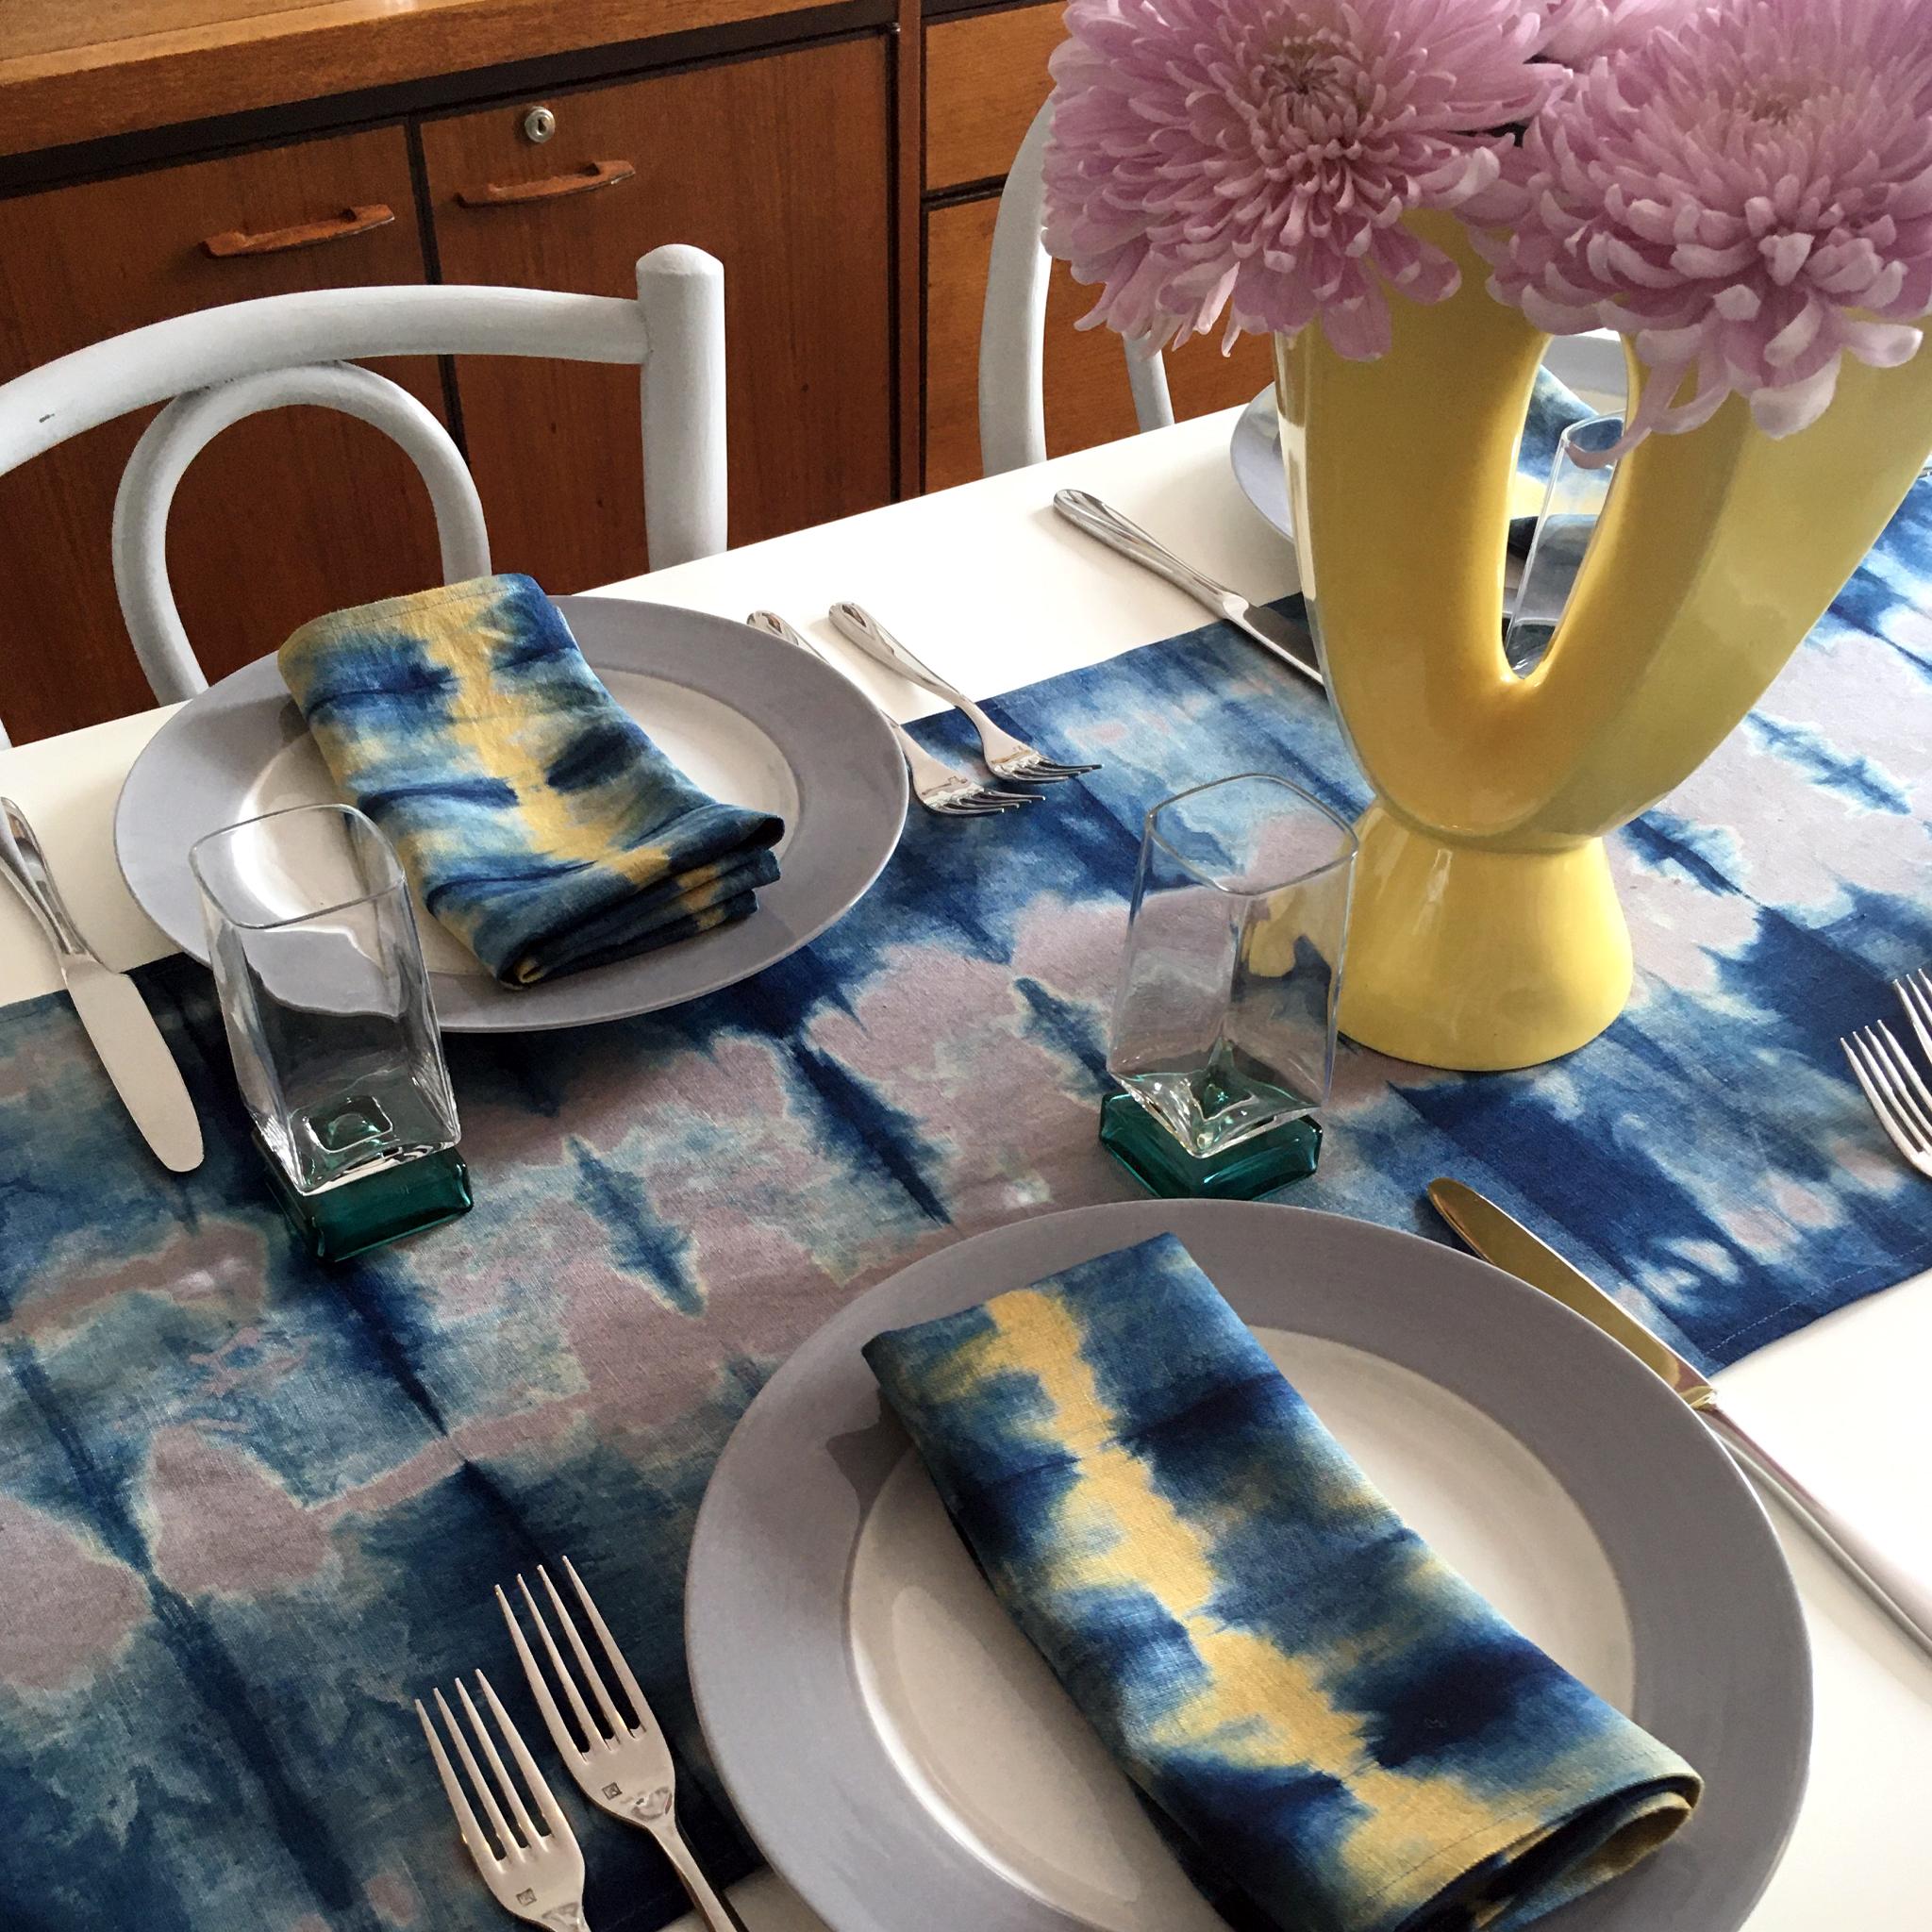 Silver gray linen table runner dyed with indigo in Pleat pattern. Hand-dyed and sewn in New York City. Runner measures approximately 18 x 72 inches. Each linen runner is hand dyed and one of a kind. 

Each linen panel is cut and folded by hand, in